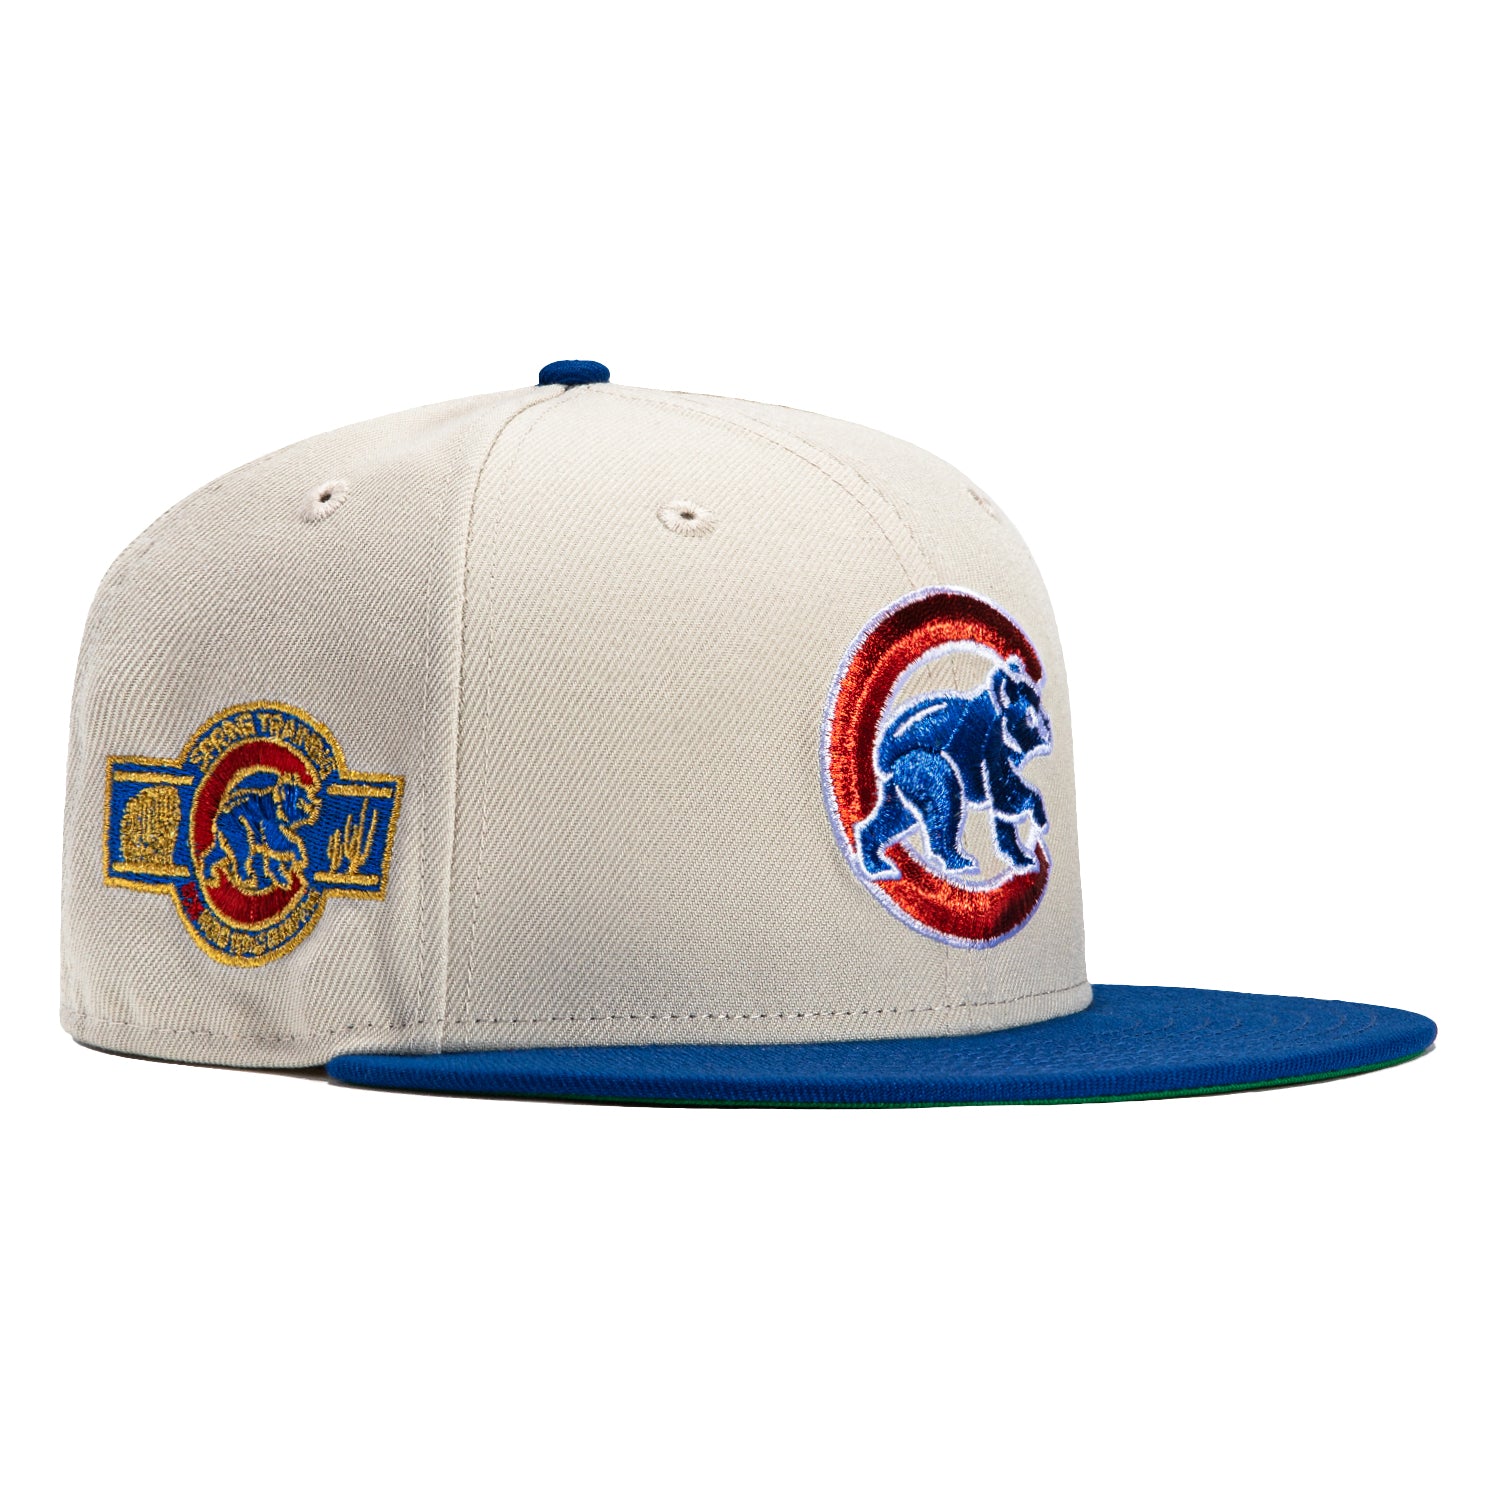 New Era 59Fifty Chicago Cubs Logo Popped Fitted Hat Royal Blue